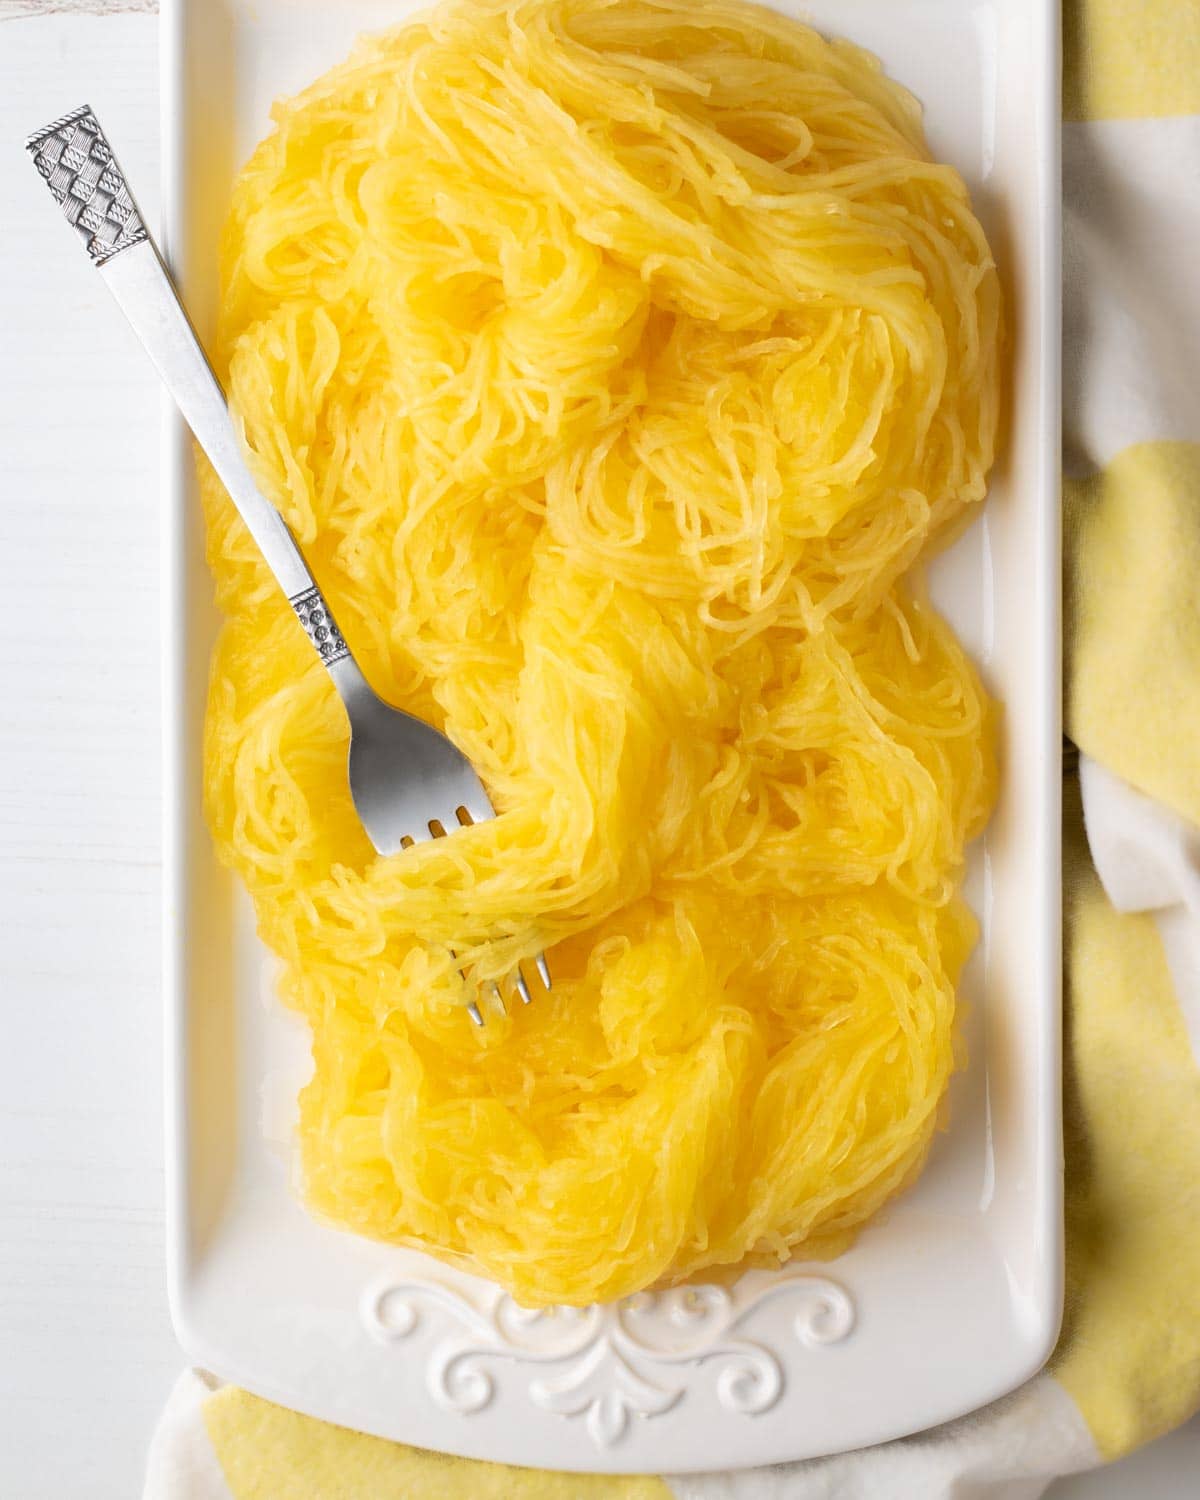 Spaghetti squash noodles from a whole squash on a platter with pretty dish cloth